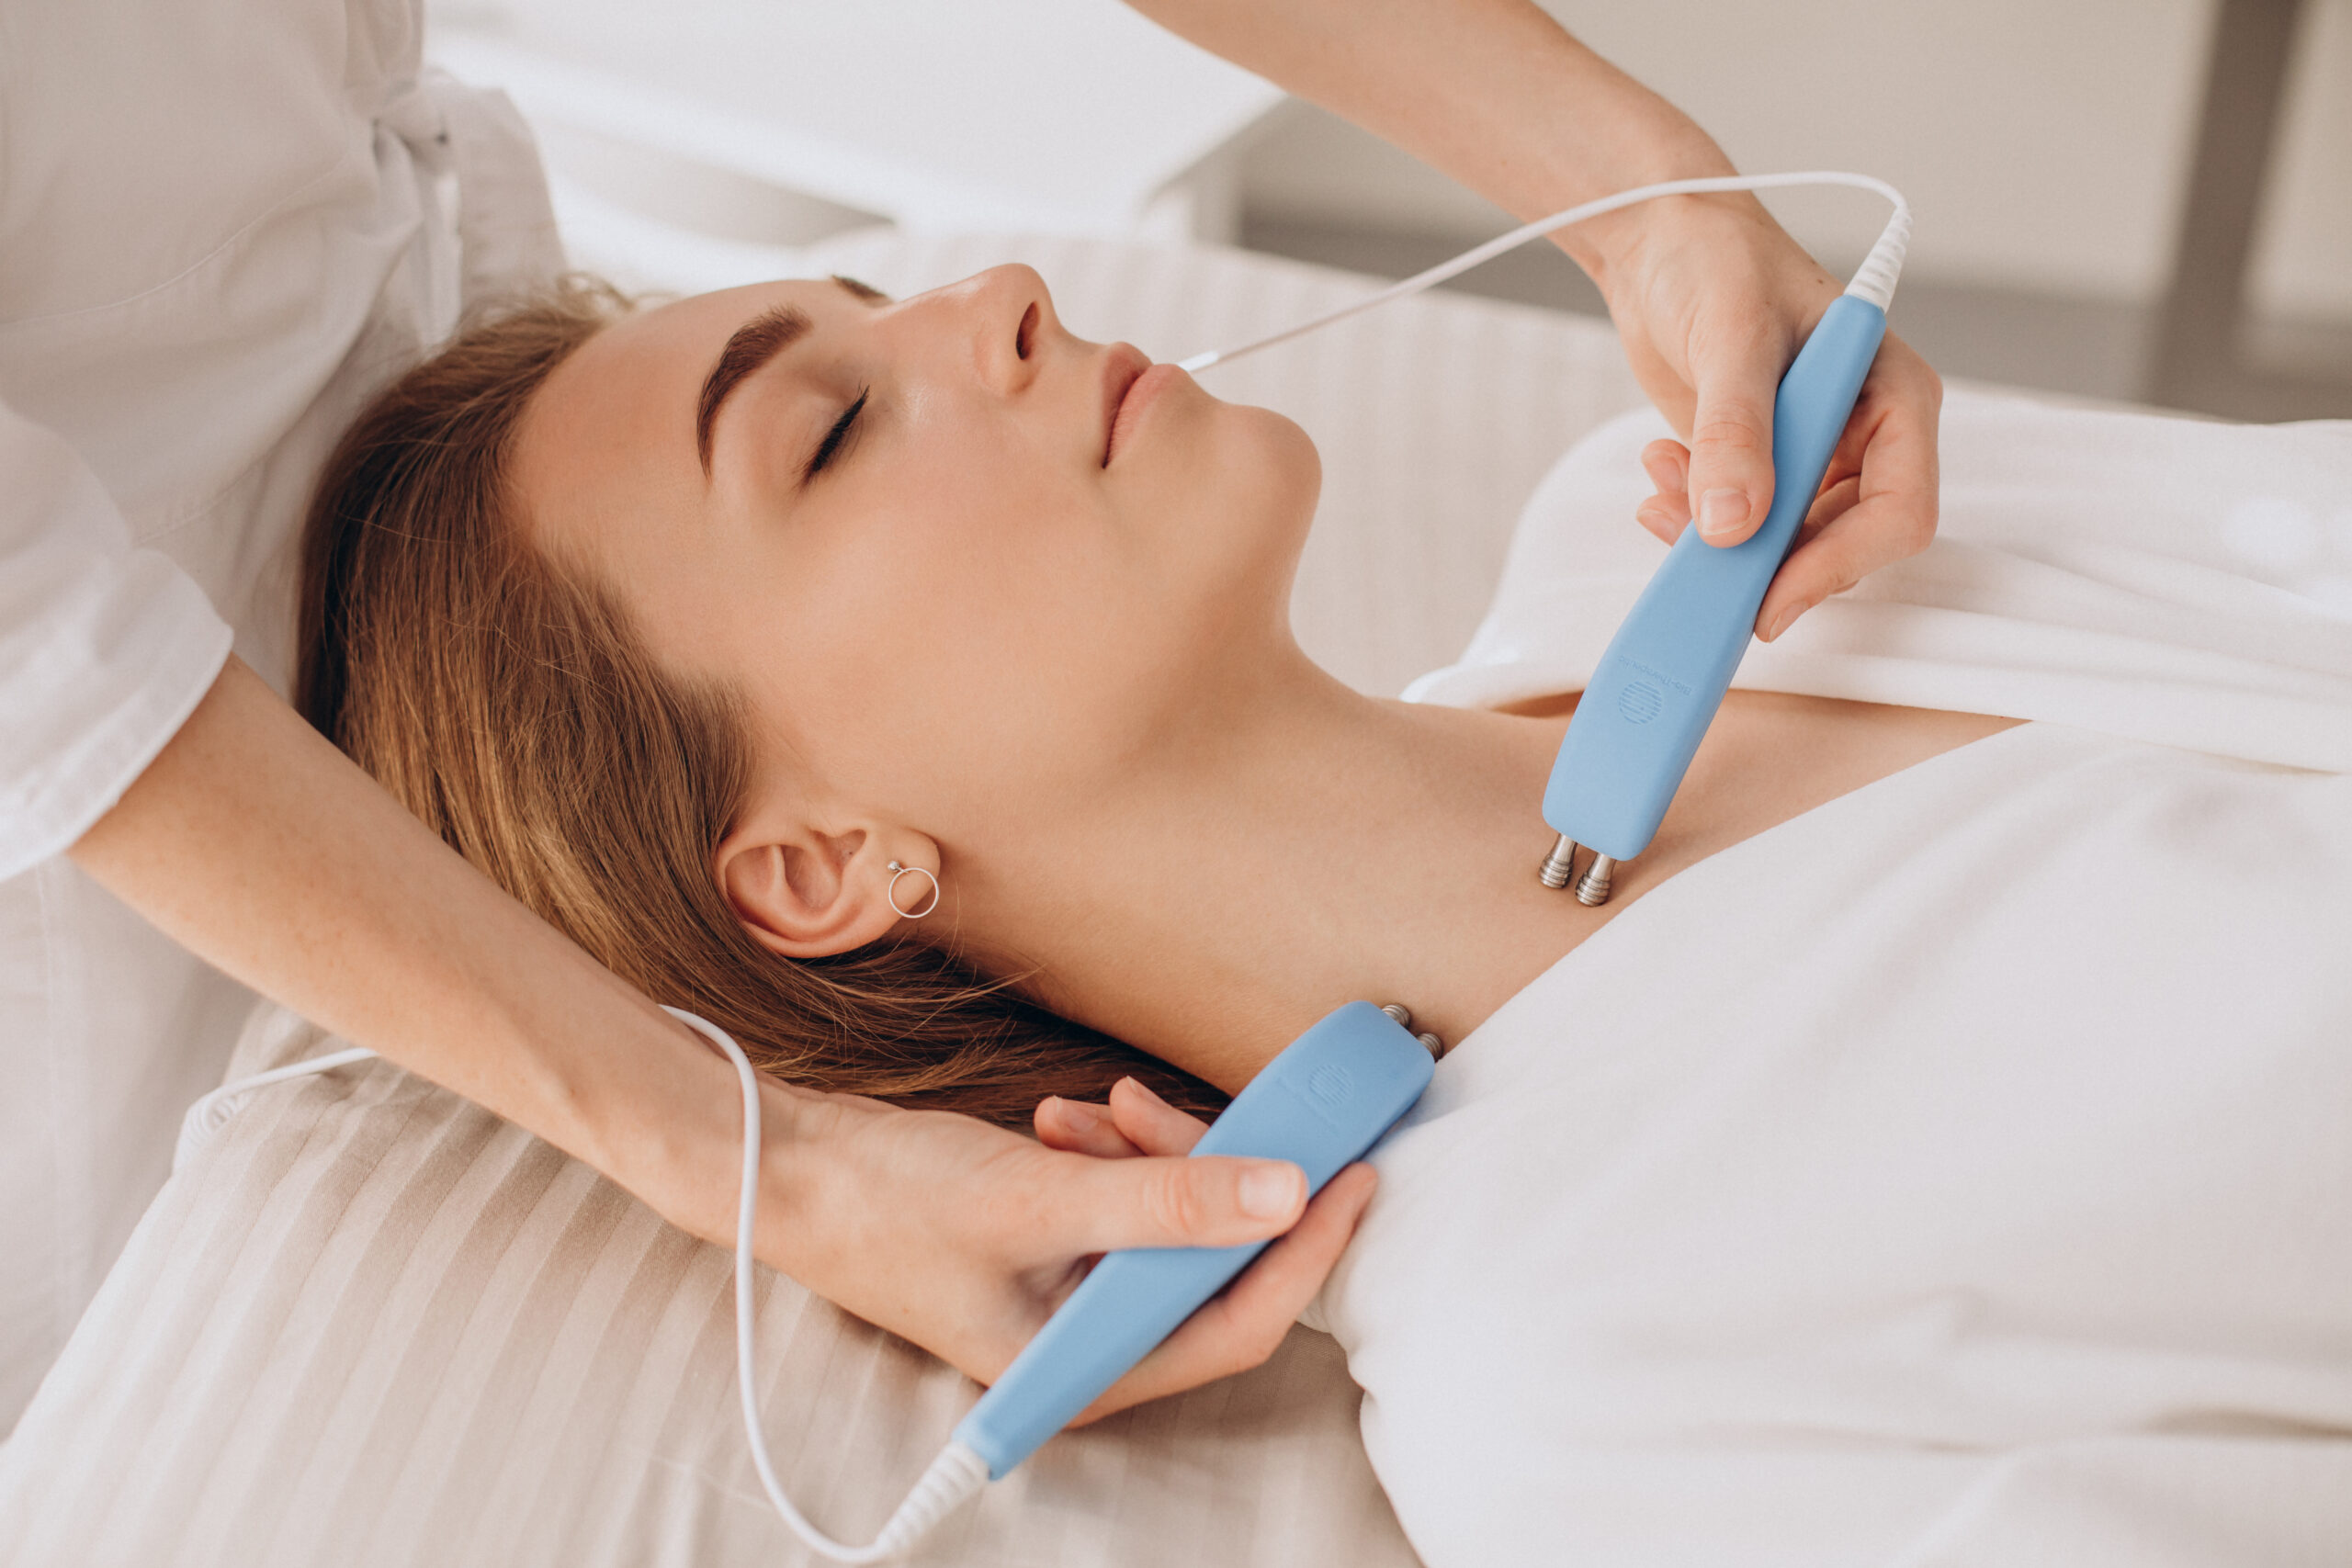 How Electrotherapy Works to Ease Pain